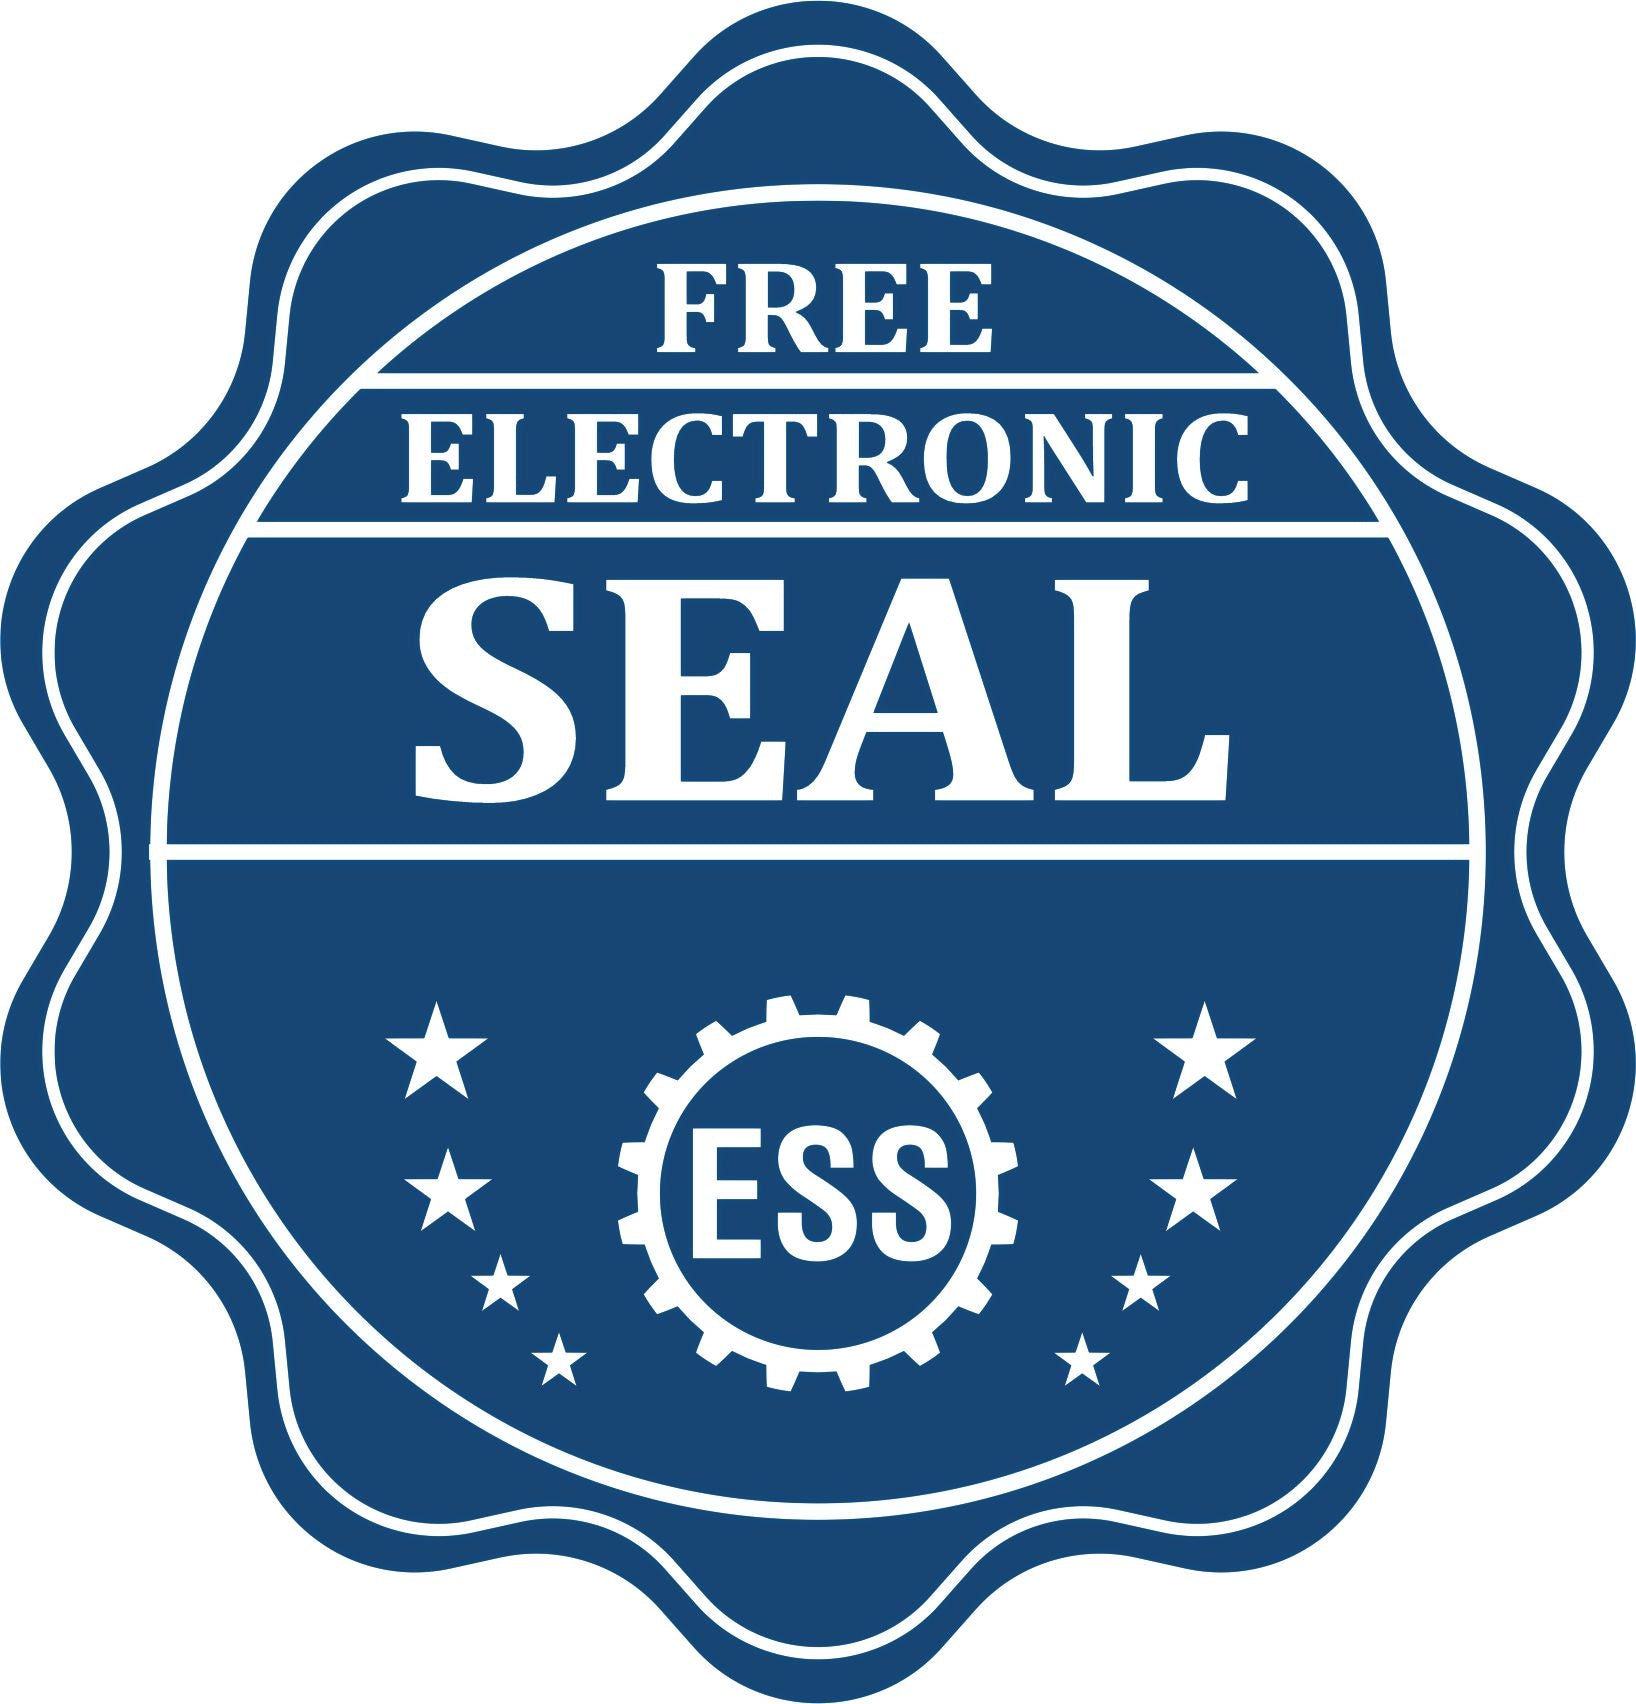 A badge showing a free electronic seal for the Handheld North Dakota Professional Engineer Embosser with stars and the ESS gear on the emblem.